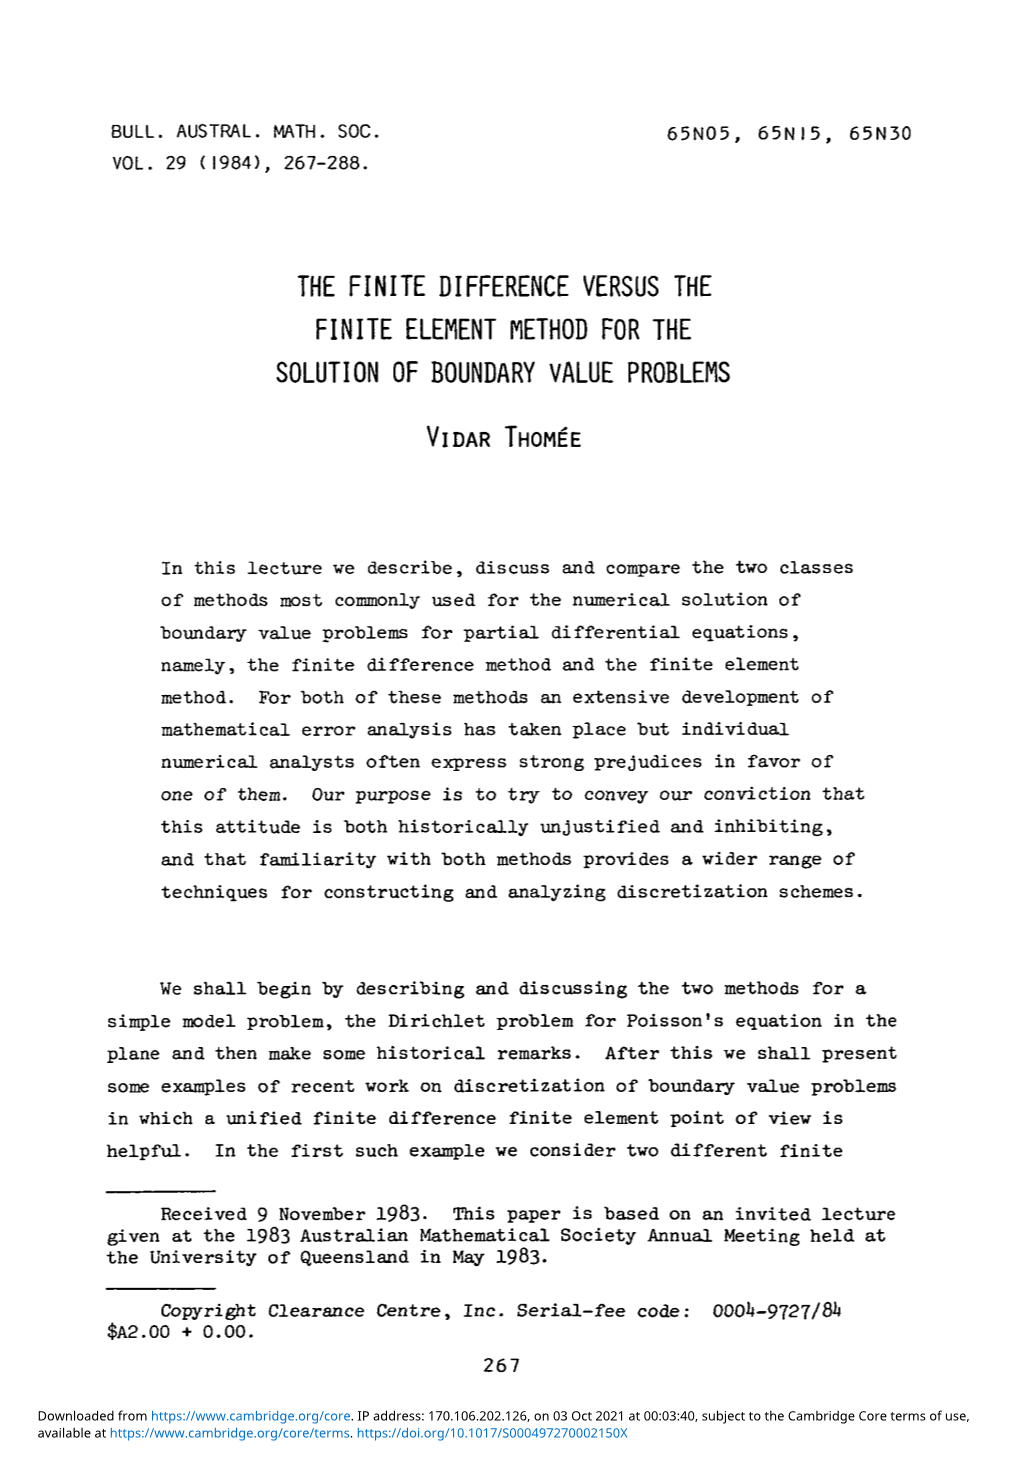 The Finite Difference Versus the Finite Element Method for the Solution of Boundary Value Problems